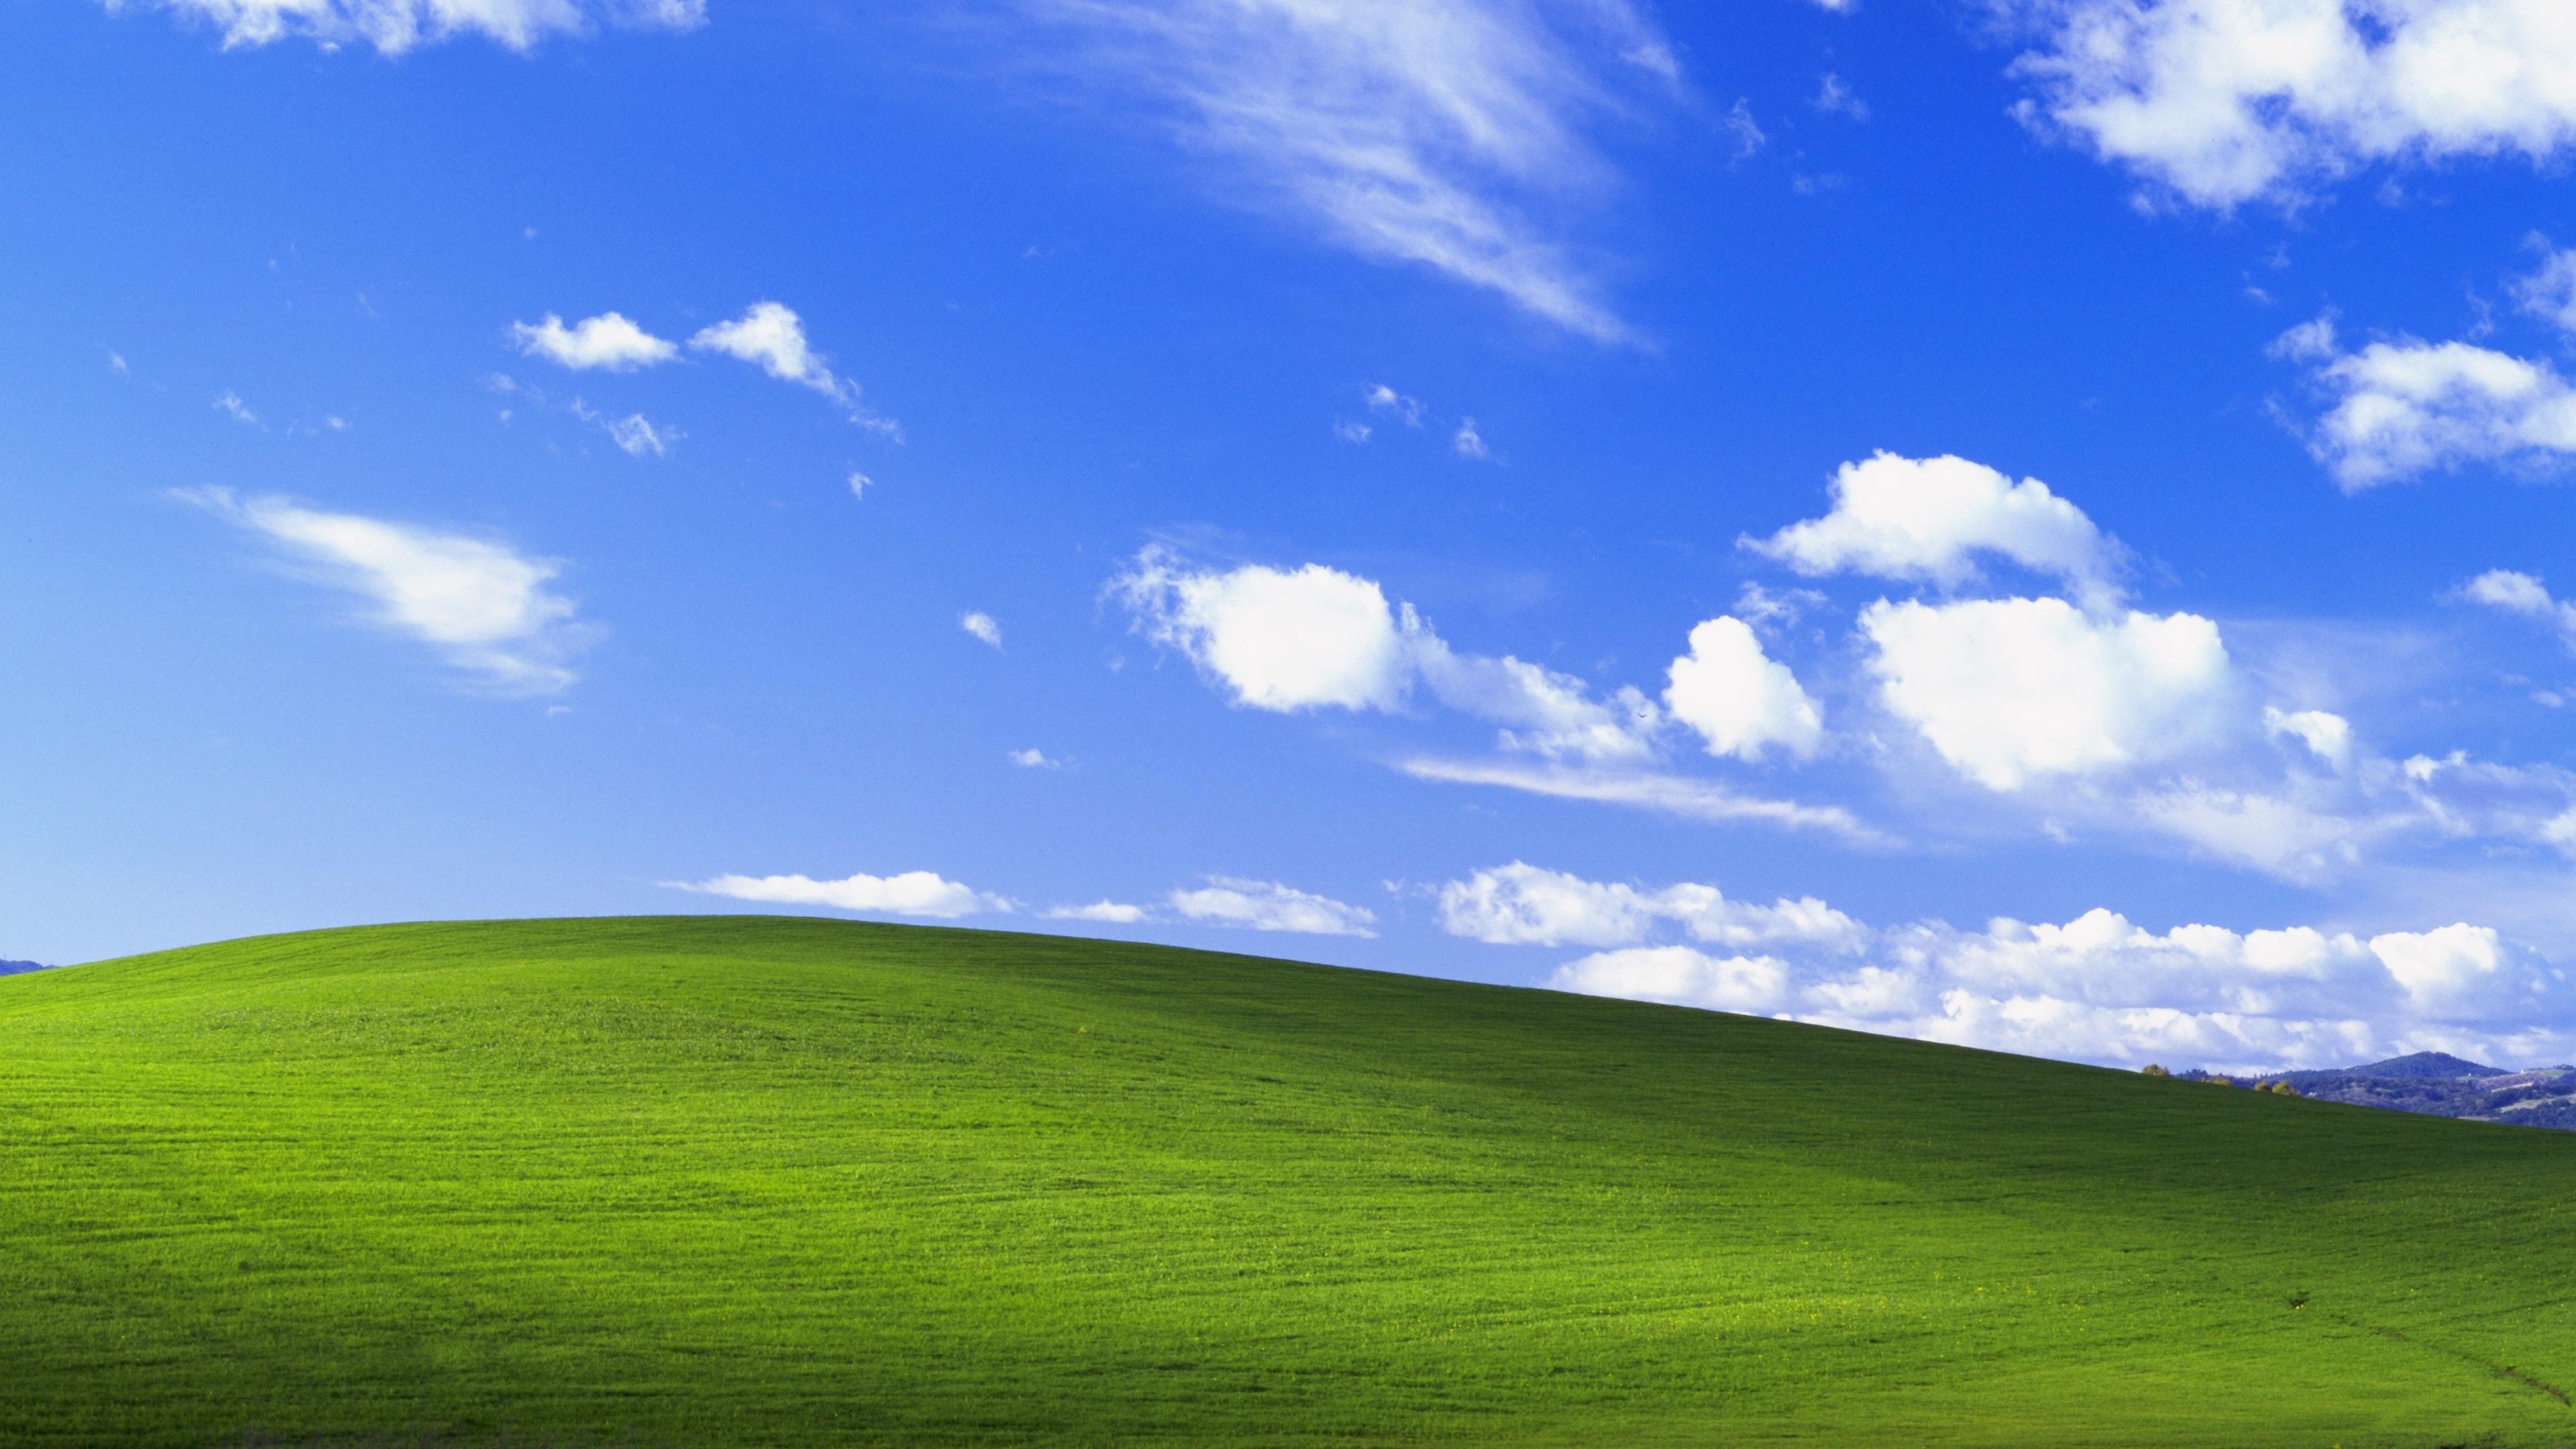 Here's the Windows XP wallpaper in glorious 4K res